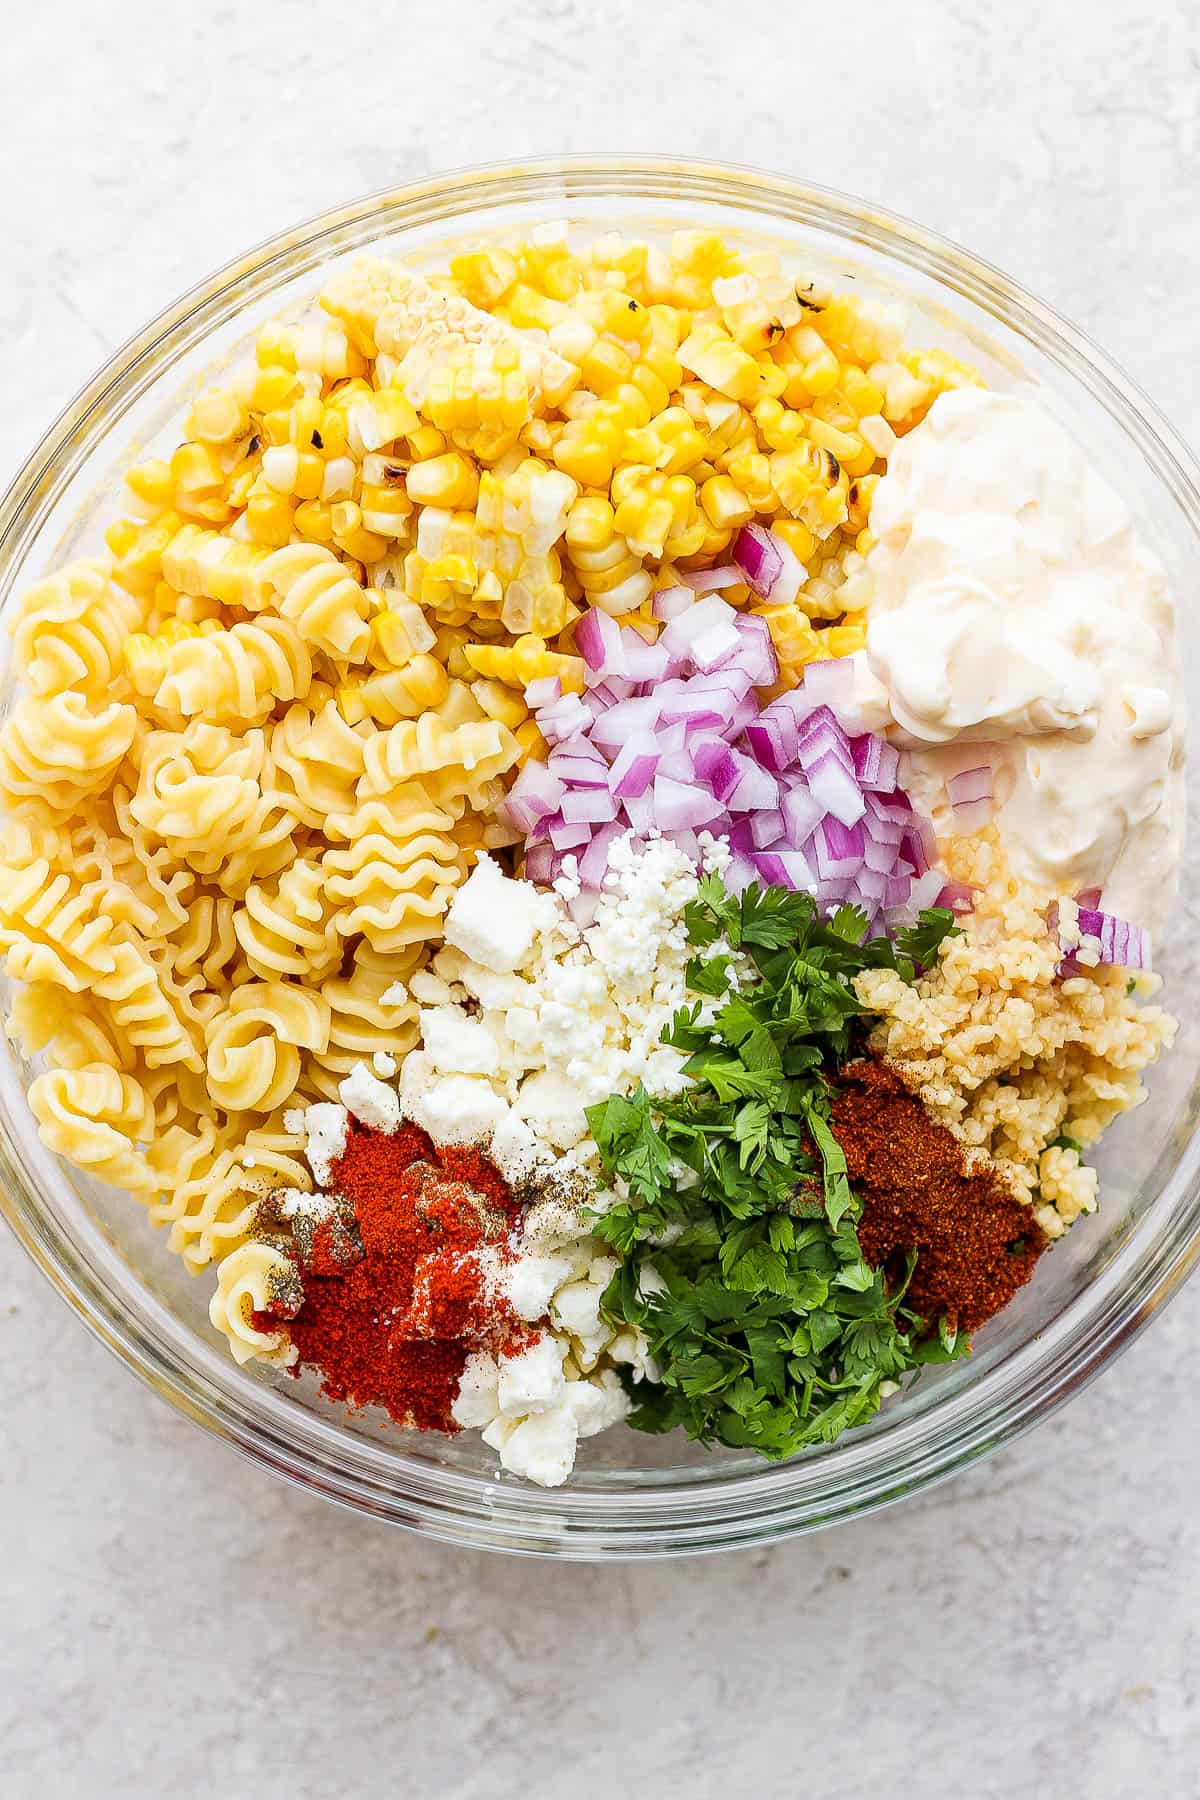 All of the pasta salad ingredients in a medium sized mixing bowl.